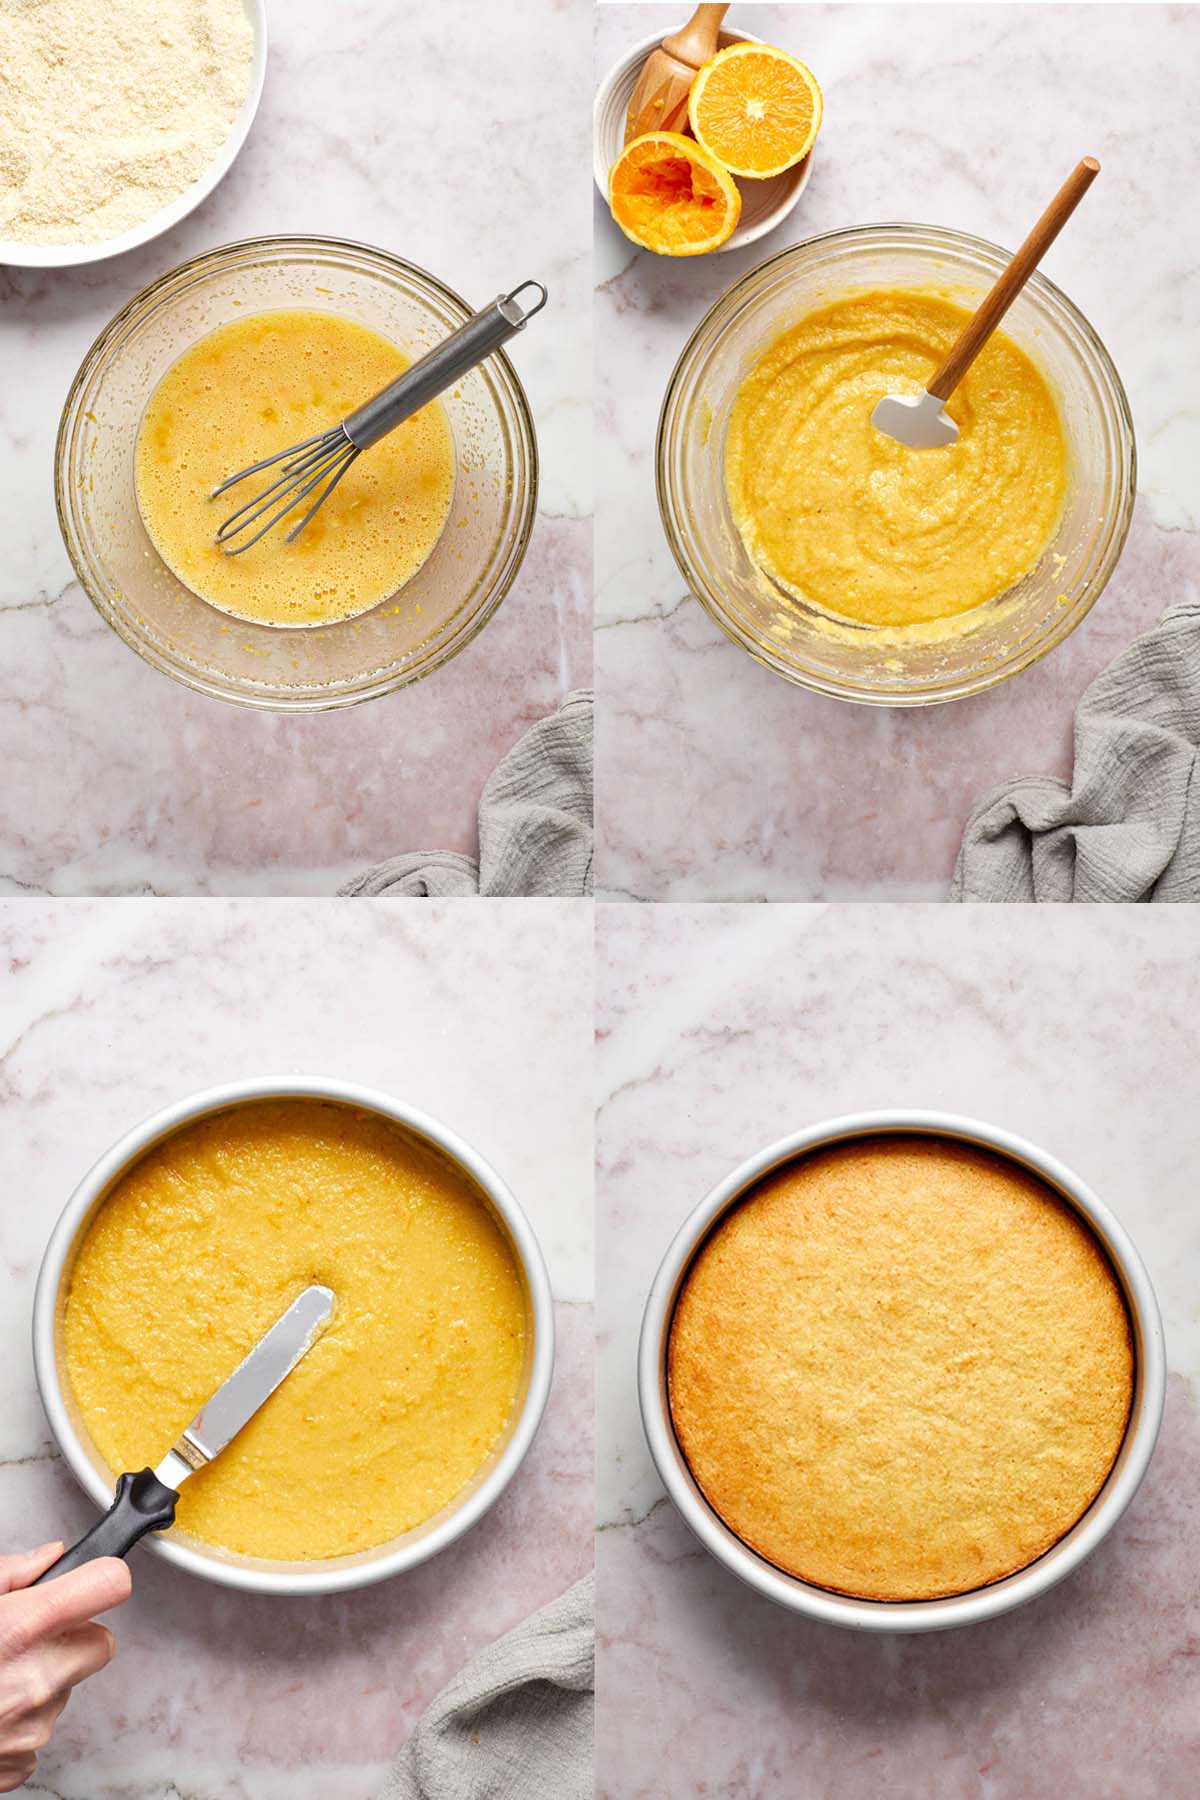 Collage of 4 images showing how the cake batter is made and baked in a round pan.